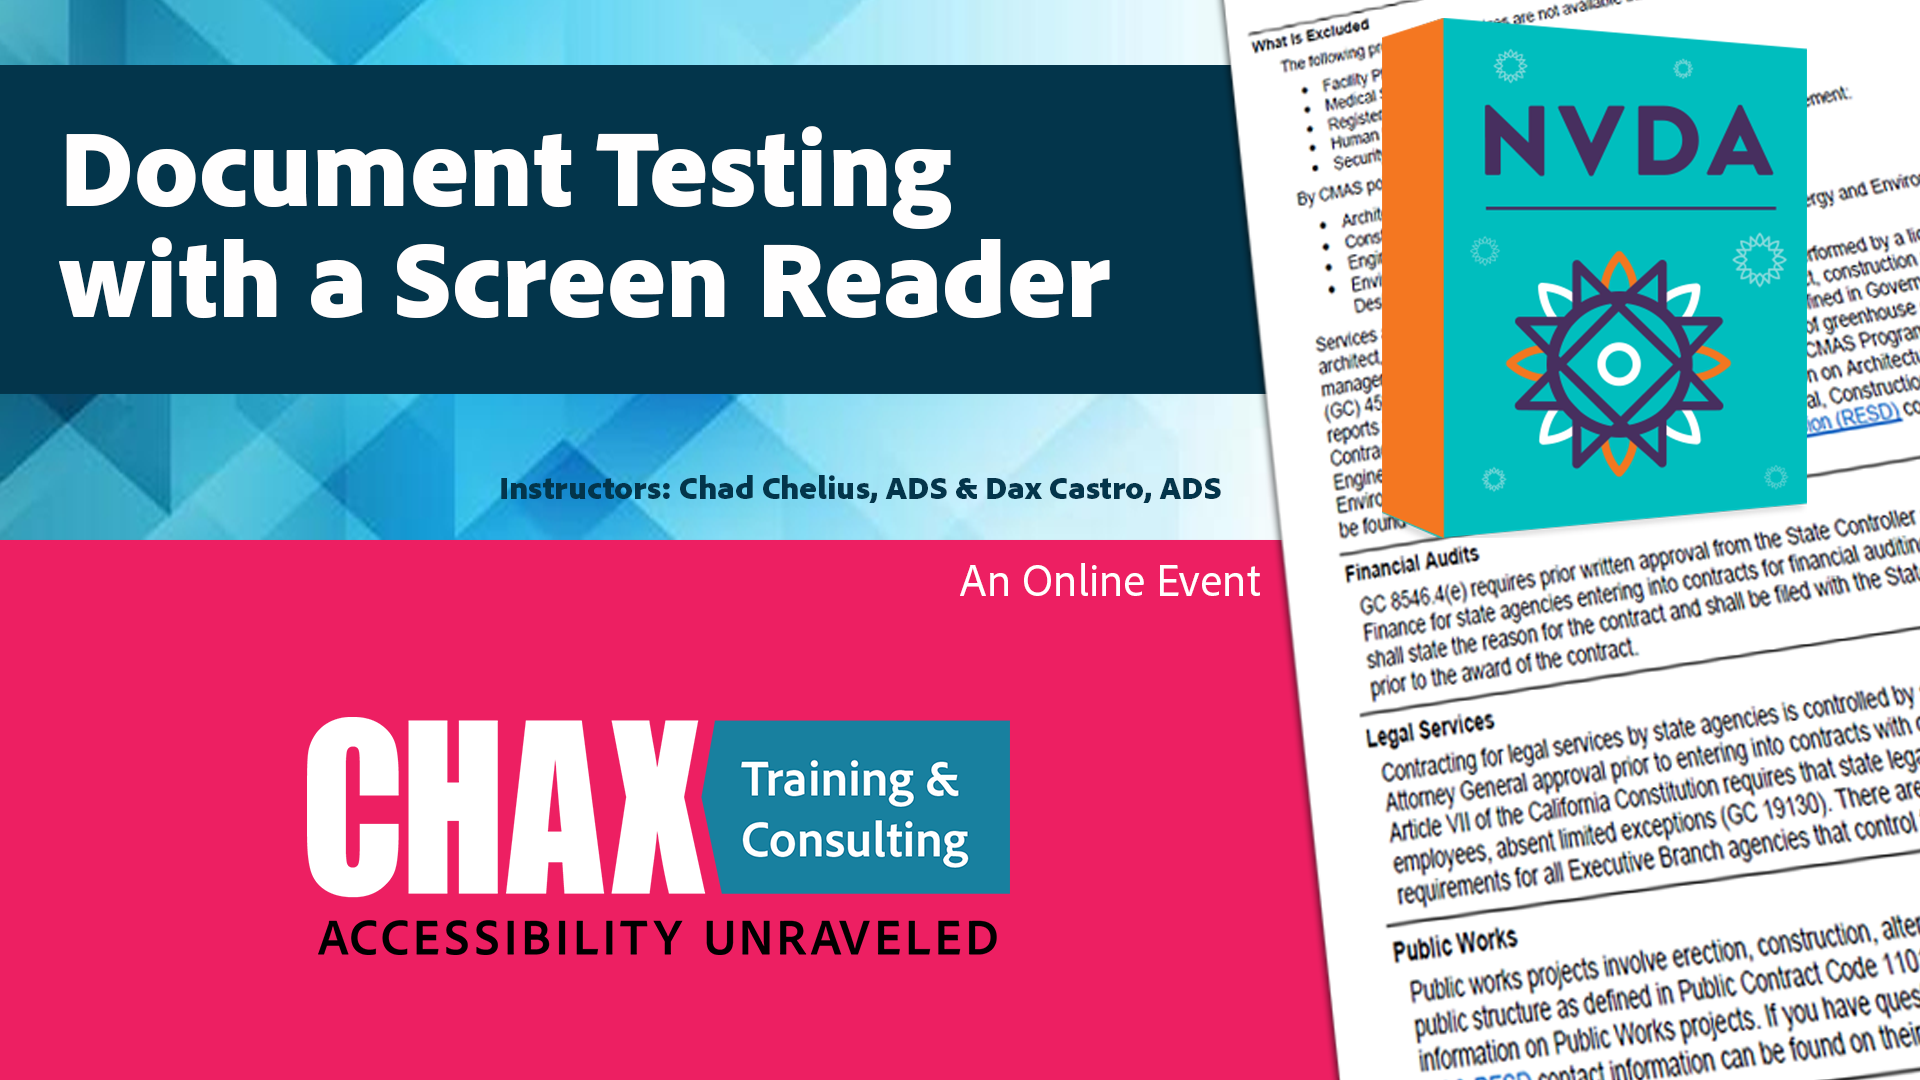 Document Testing with a Screen Reader